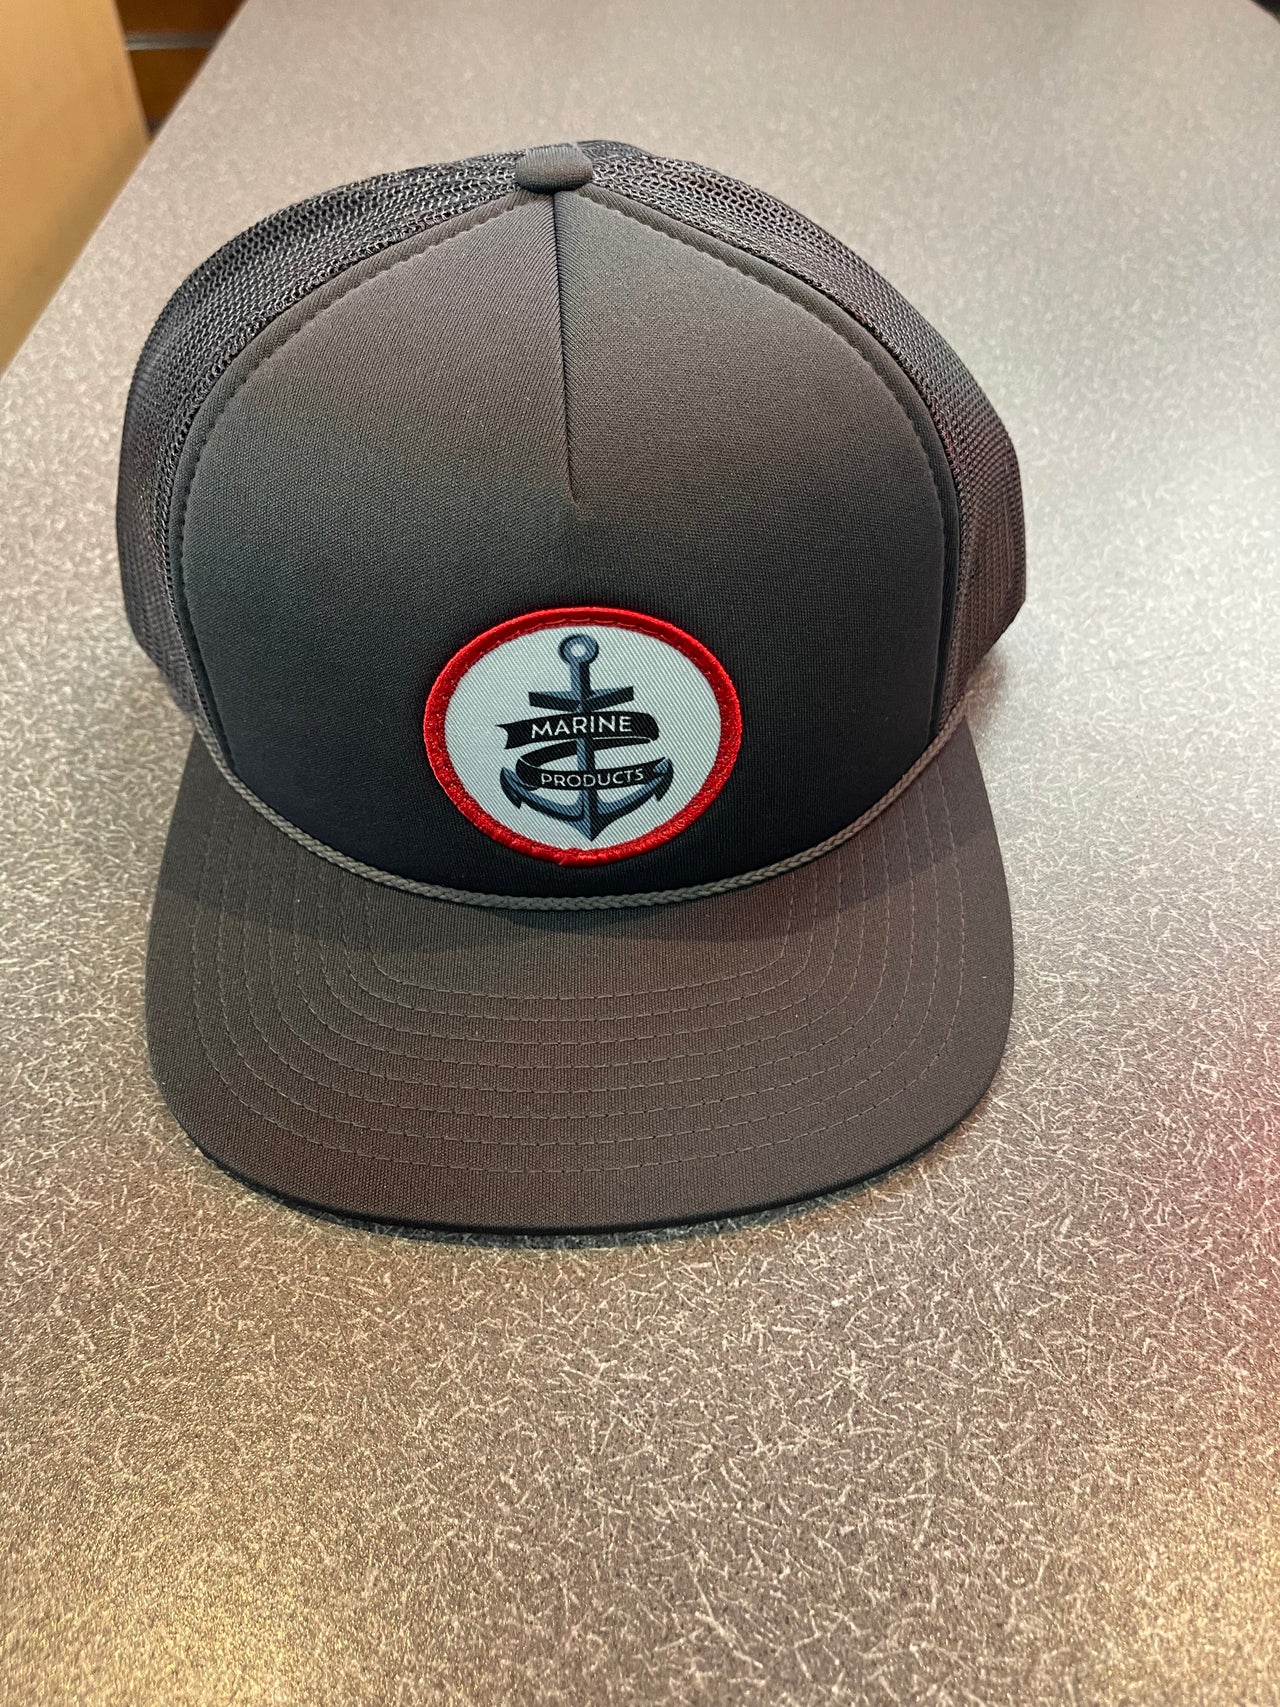 Marine Products Charcoal Trucker Hat w/ Anchor Patch